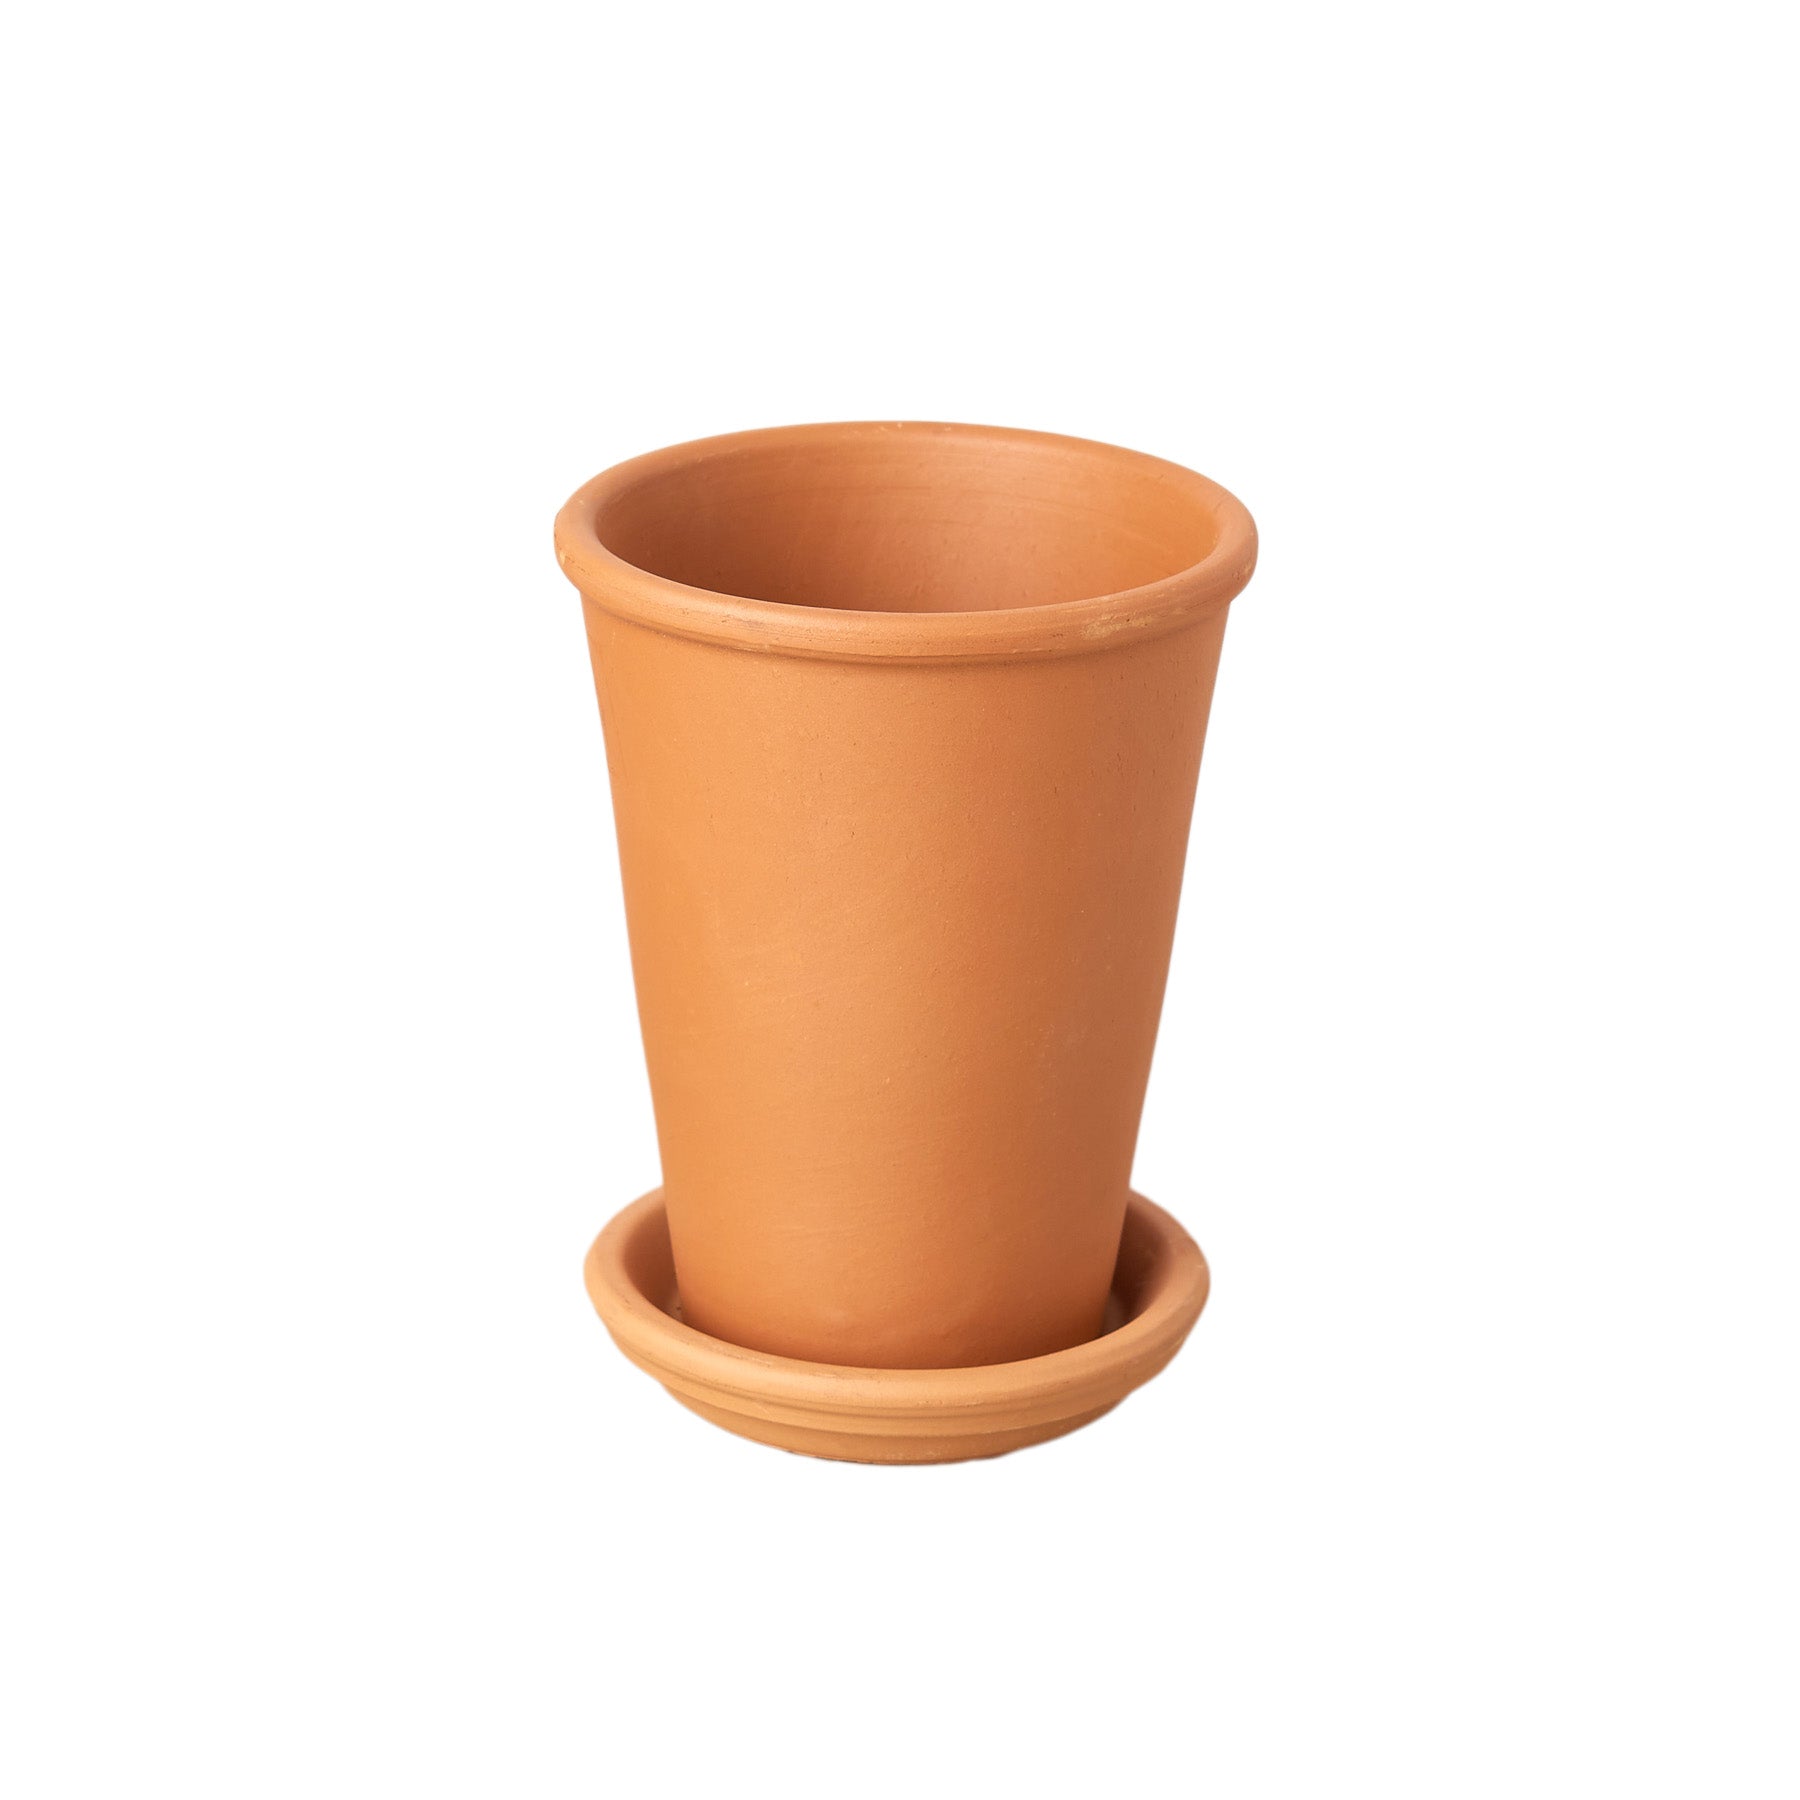 A small clay pot on a white background at one of the best plant nurseries near me.